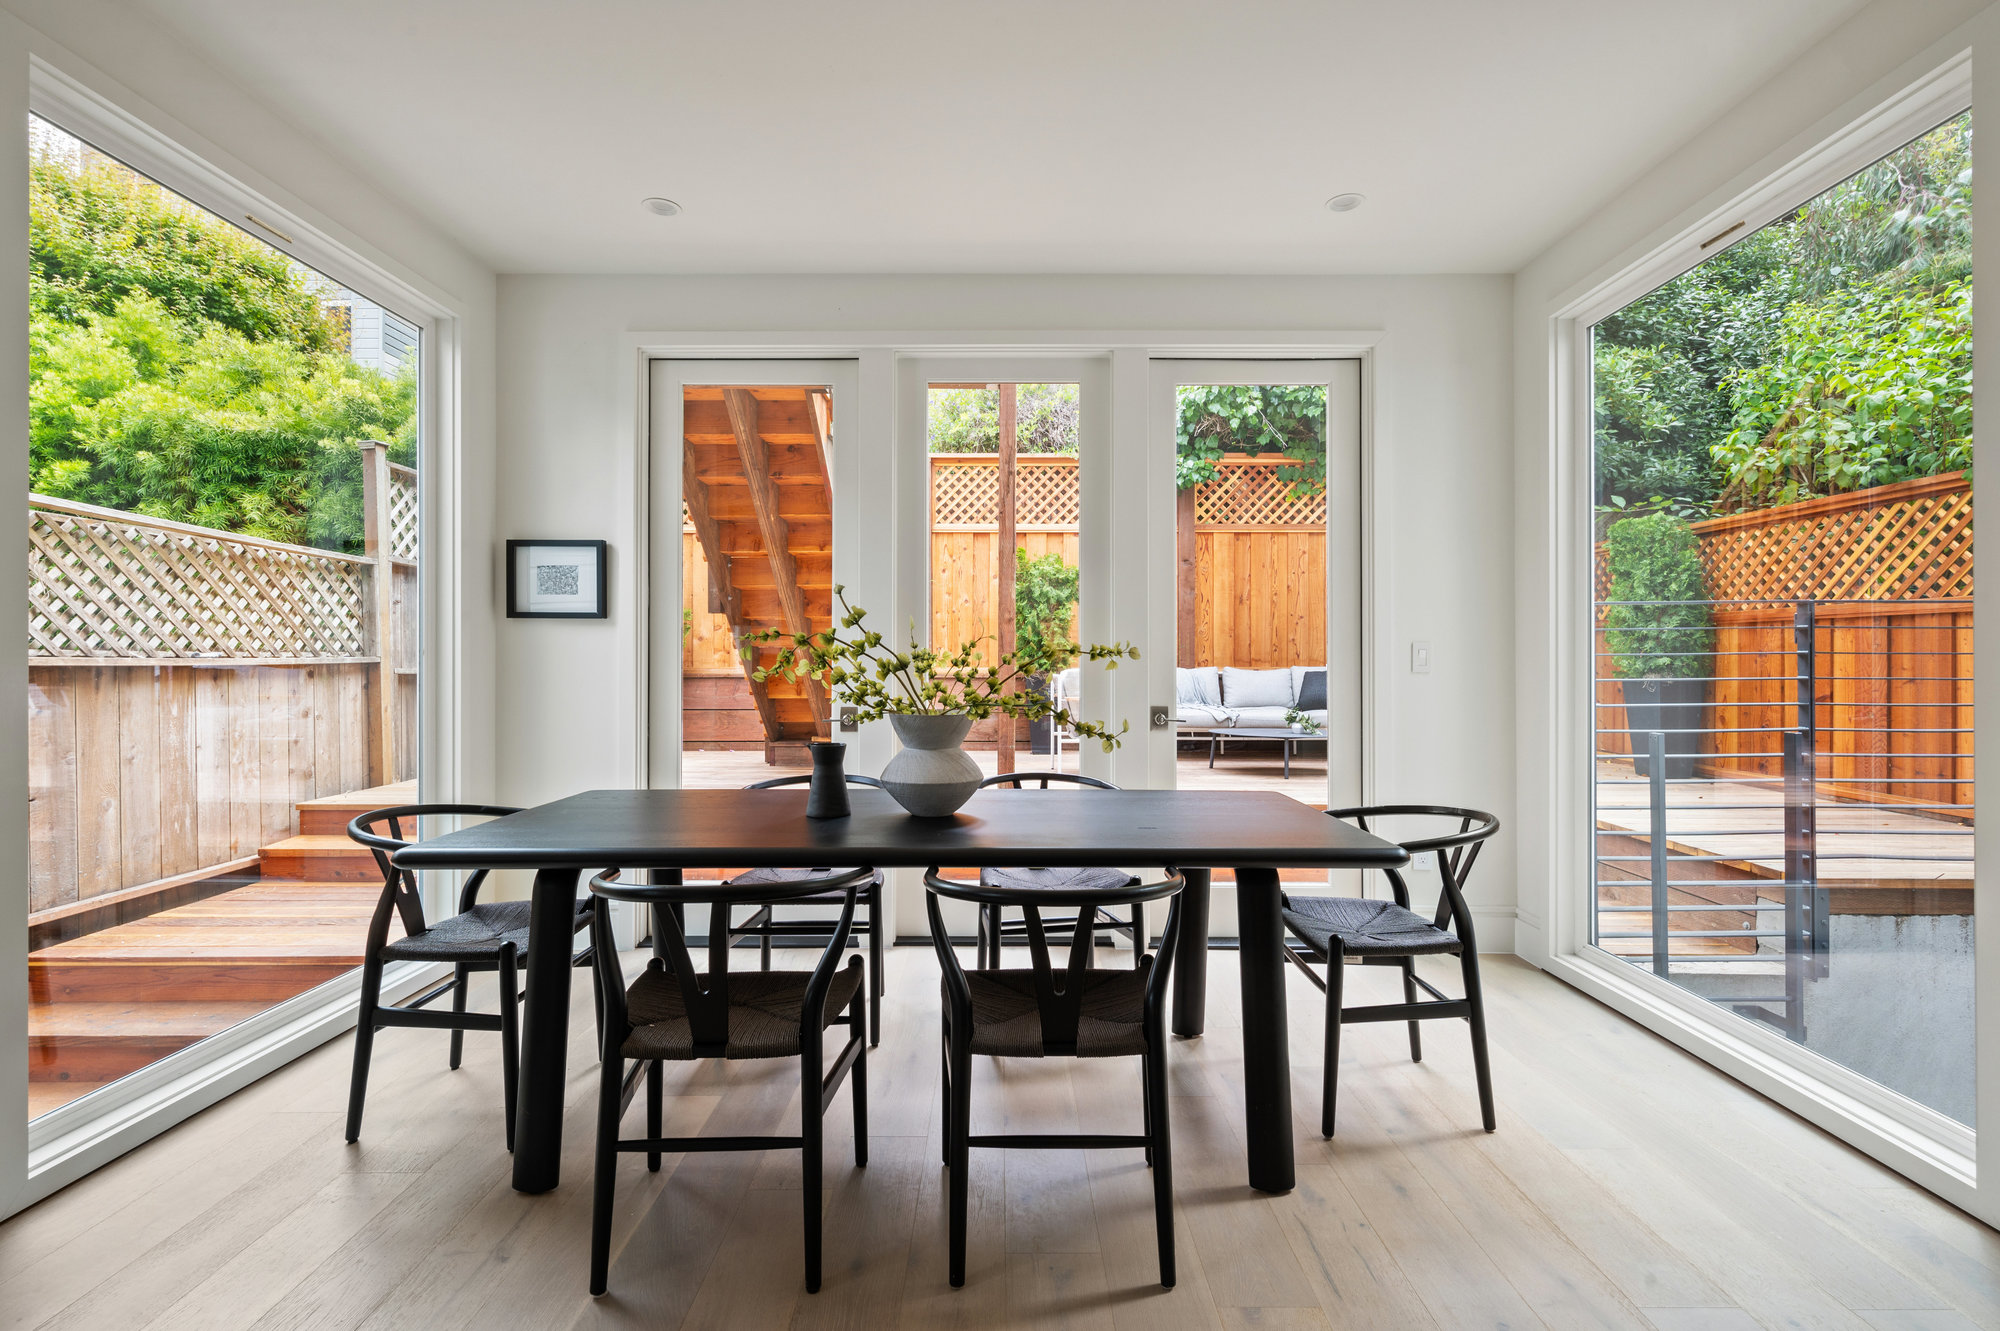 Property Photo: The dining room is engulfed by floor to ceiling windows and has french doors that open up to outdoor space.